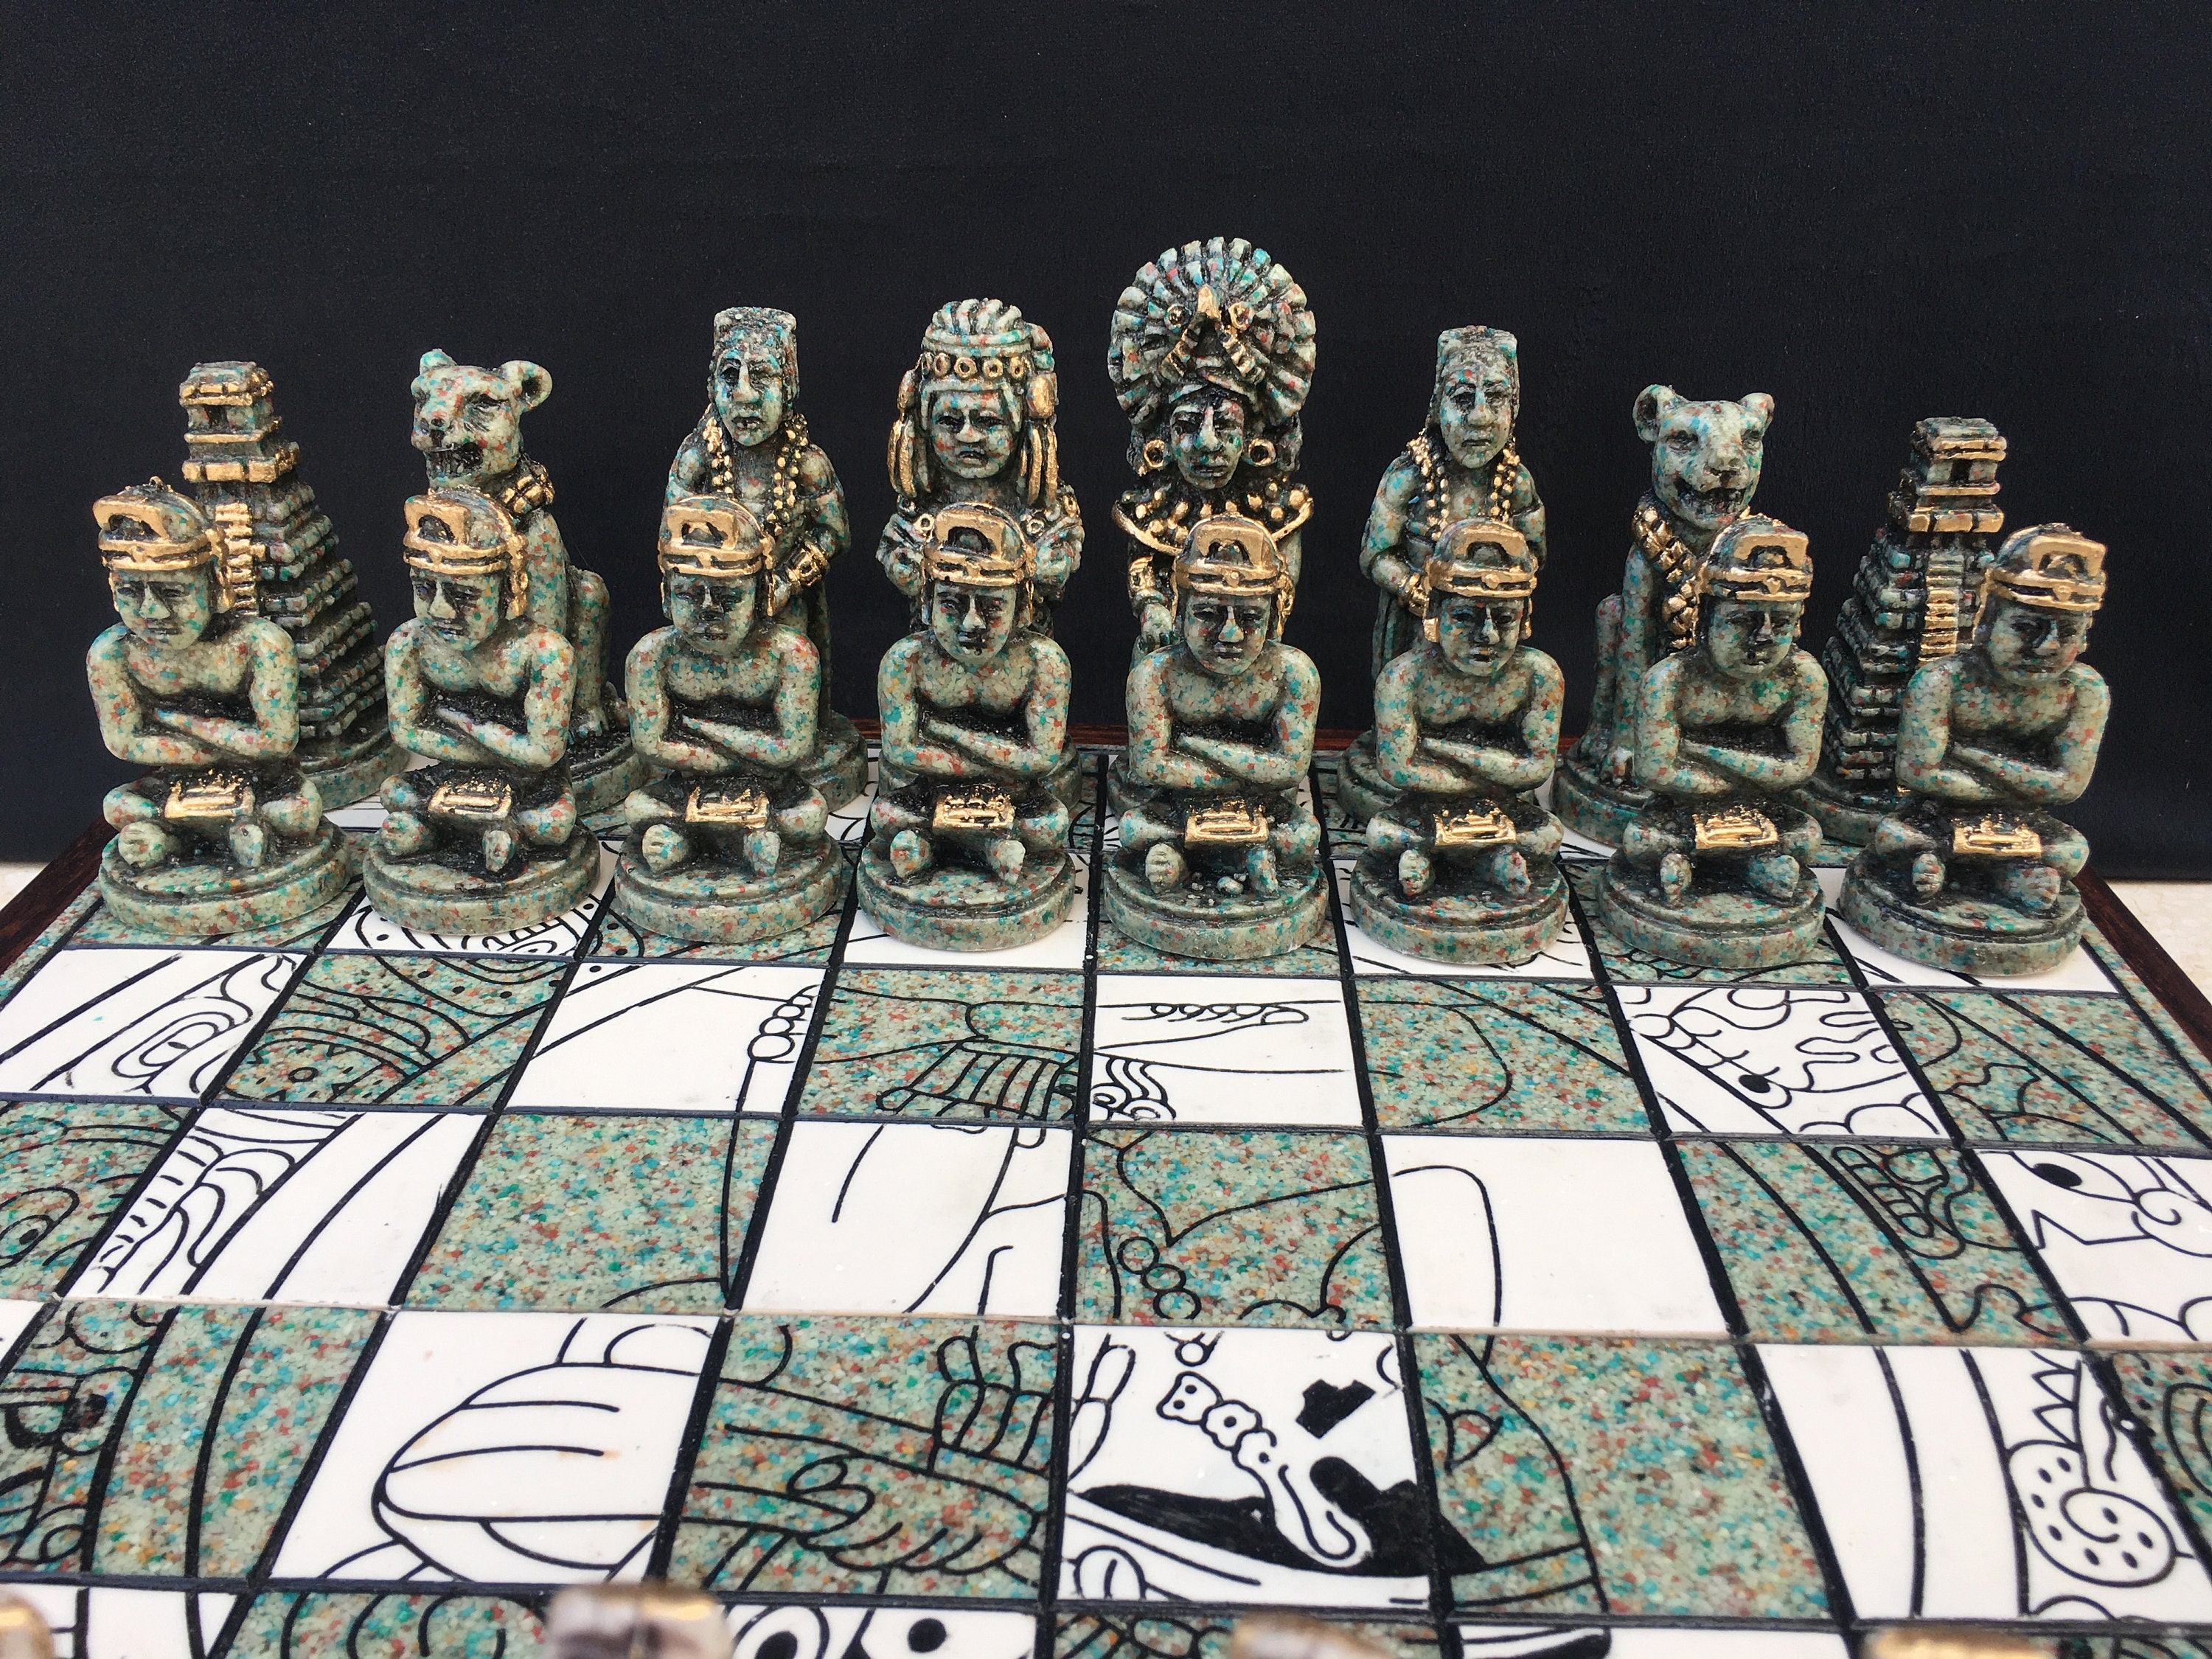 boardgames #gamenight #tabletop #mayan #mexico #chess This video is S